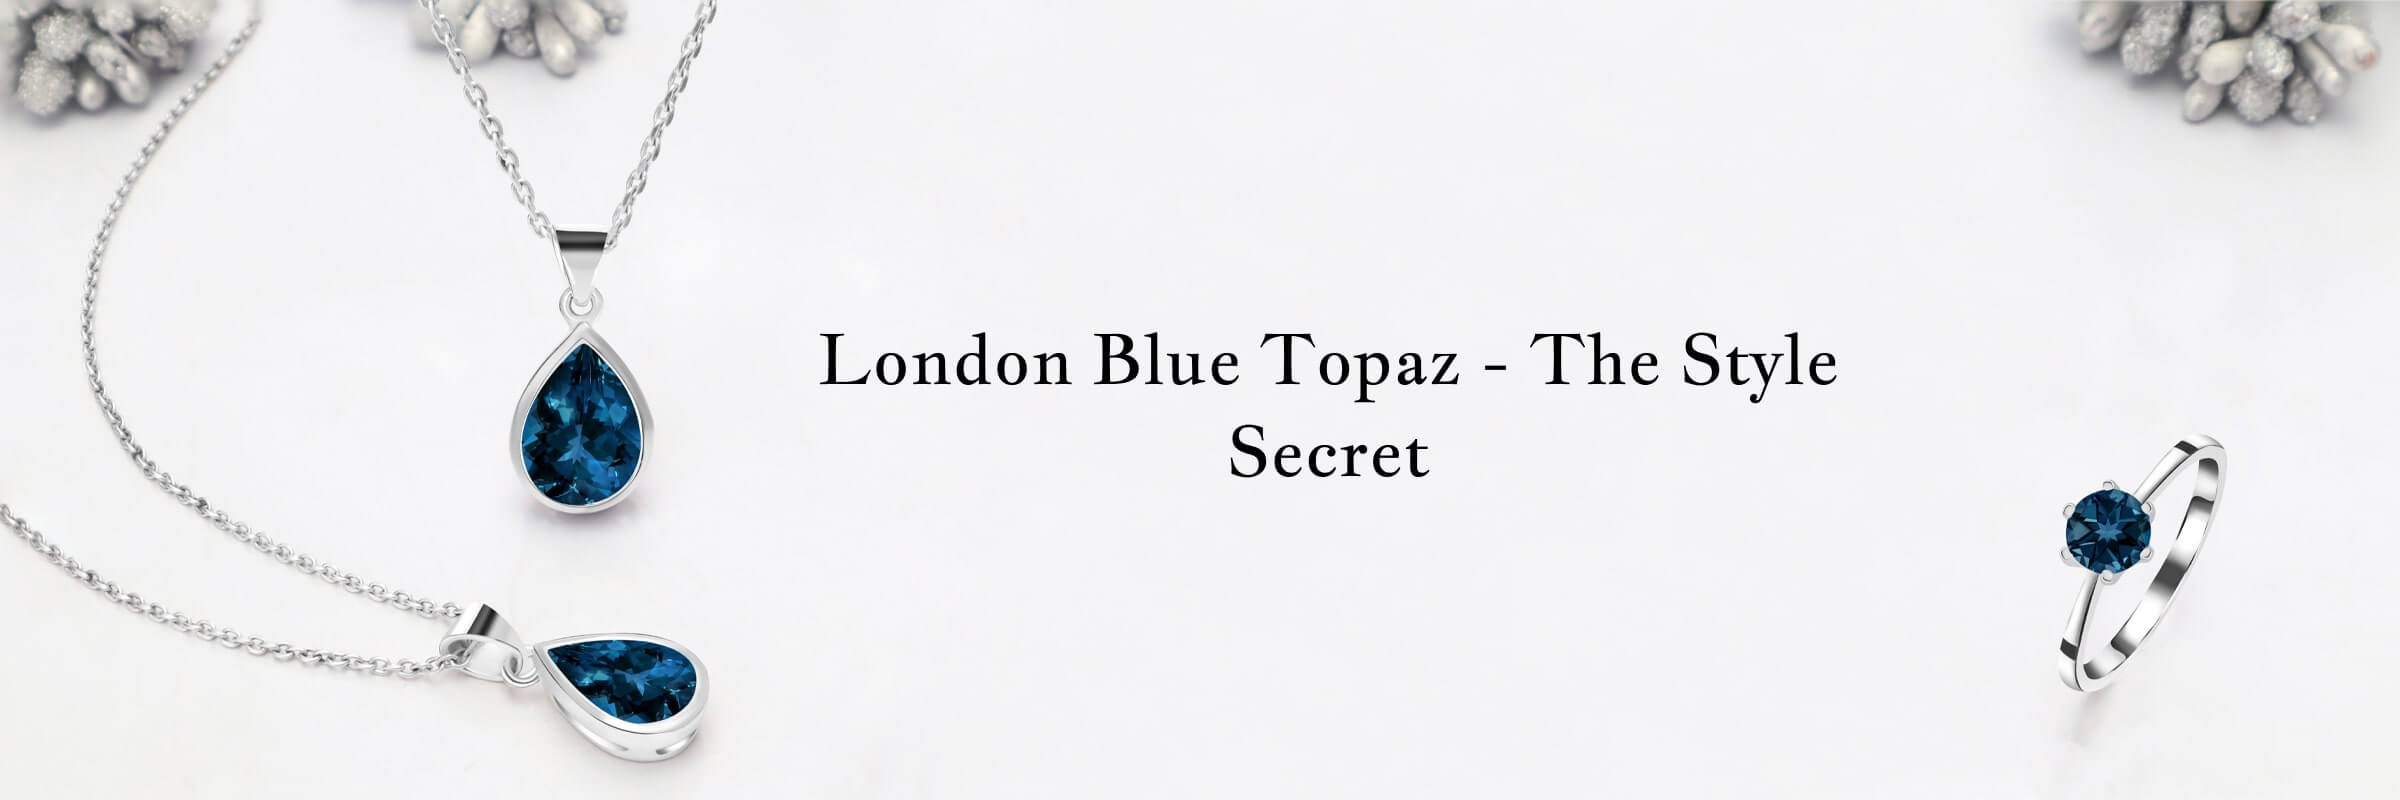 How to use London Blue Topaz